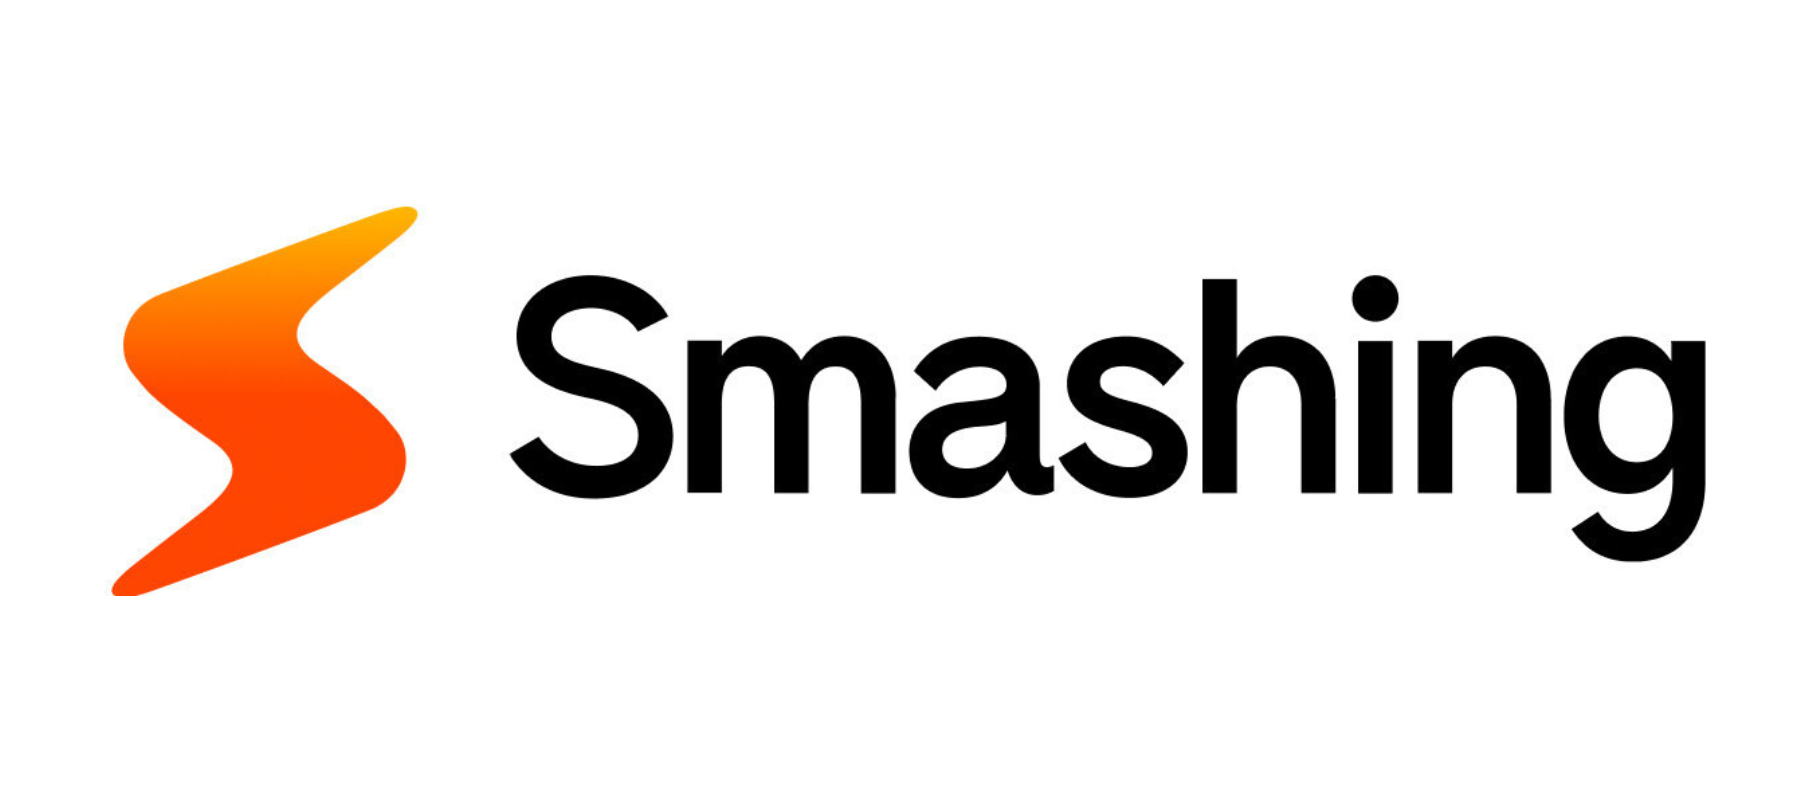 Daily Reader Labs launches Smashing, an easier way to solve the problem of content overload